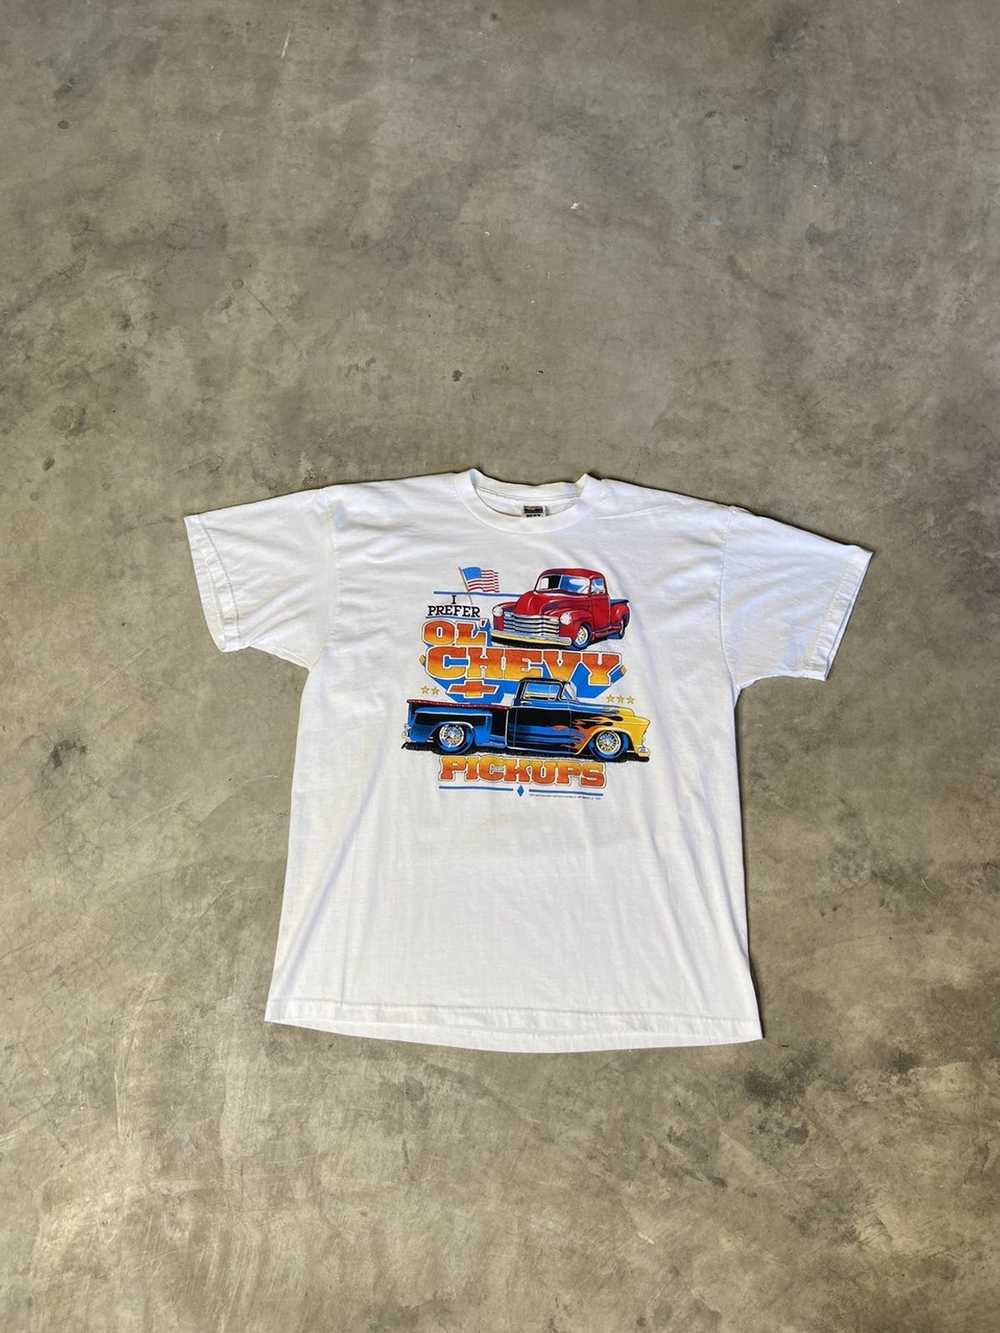 Made In Usa × Vintage Vintage Chevy Truck Tee 1989 - image 1